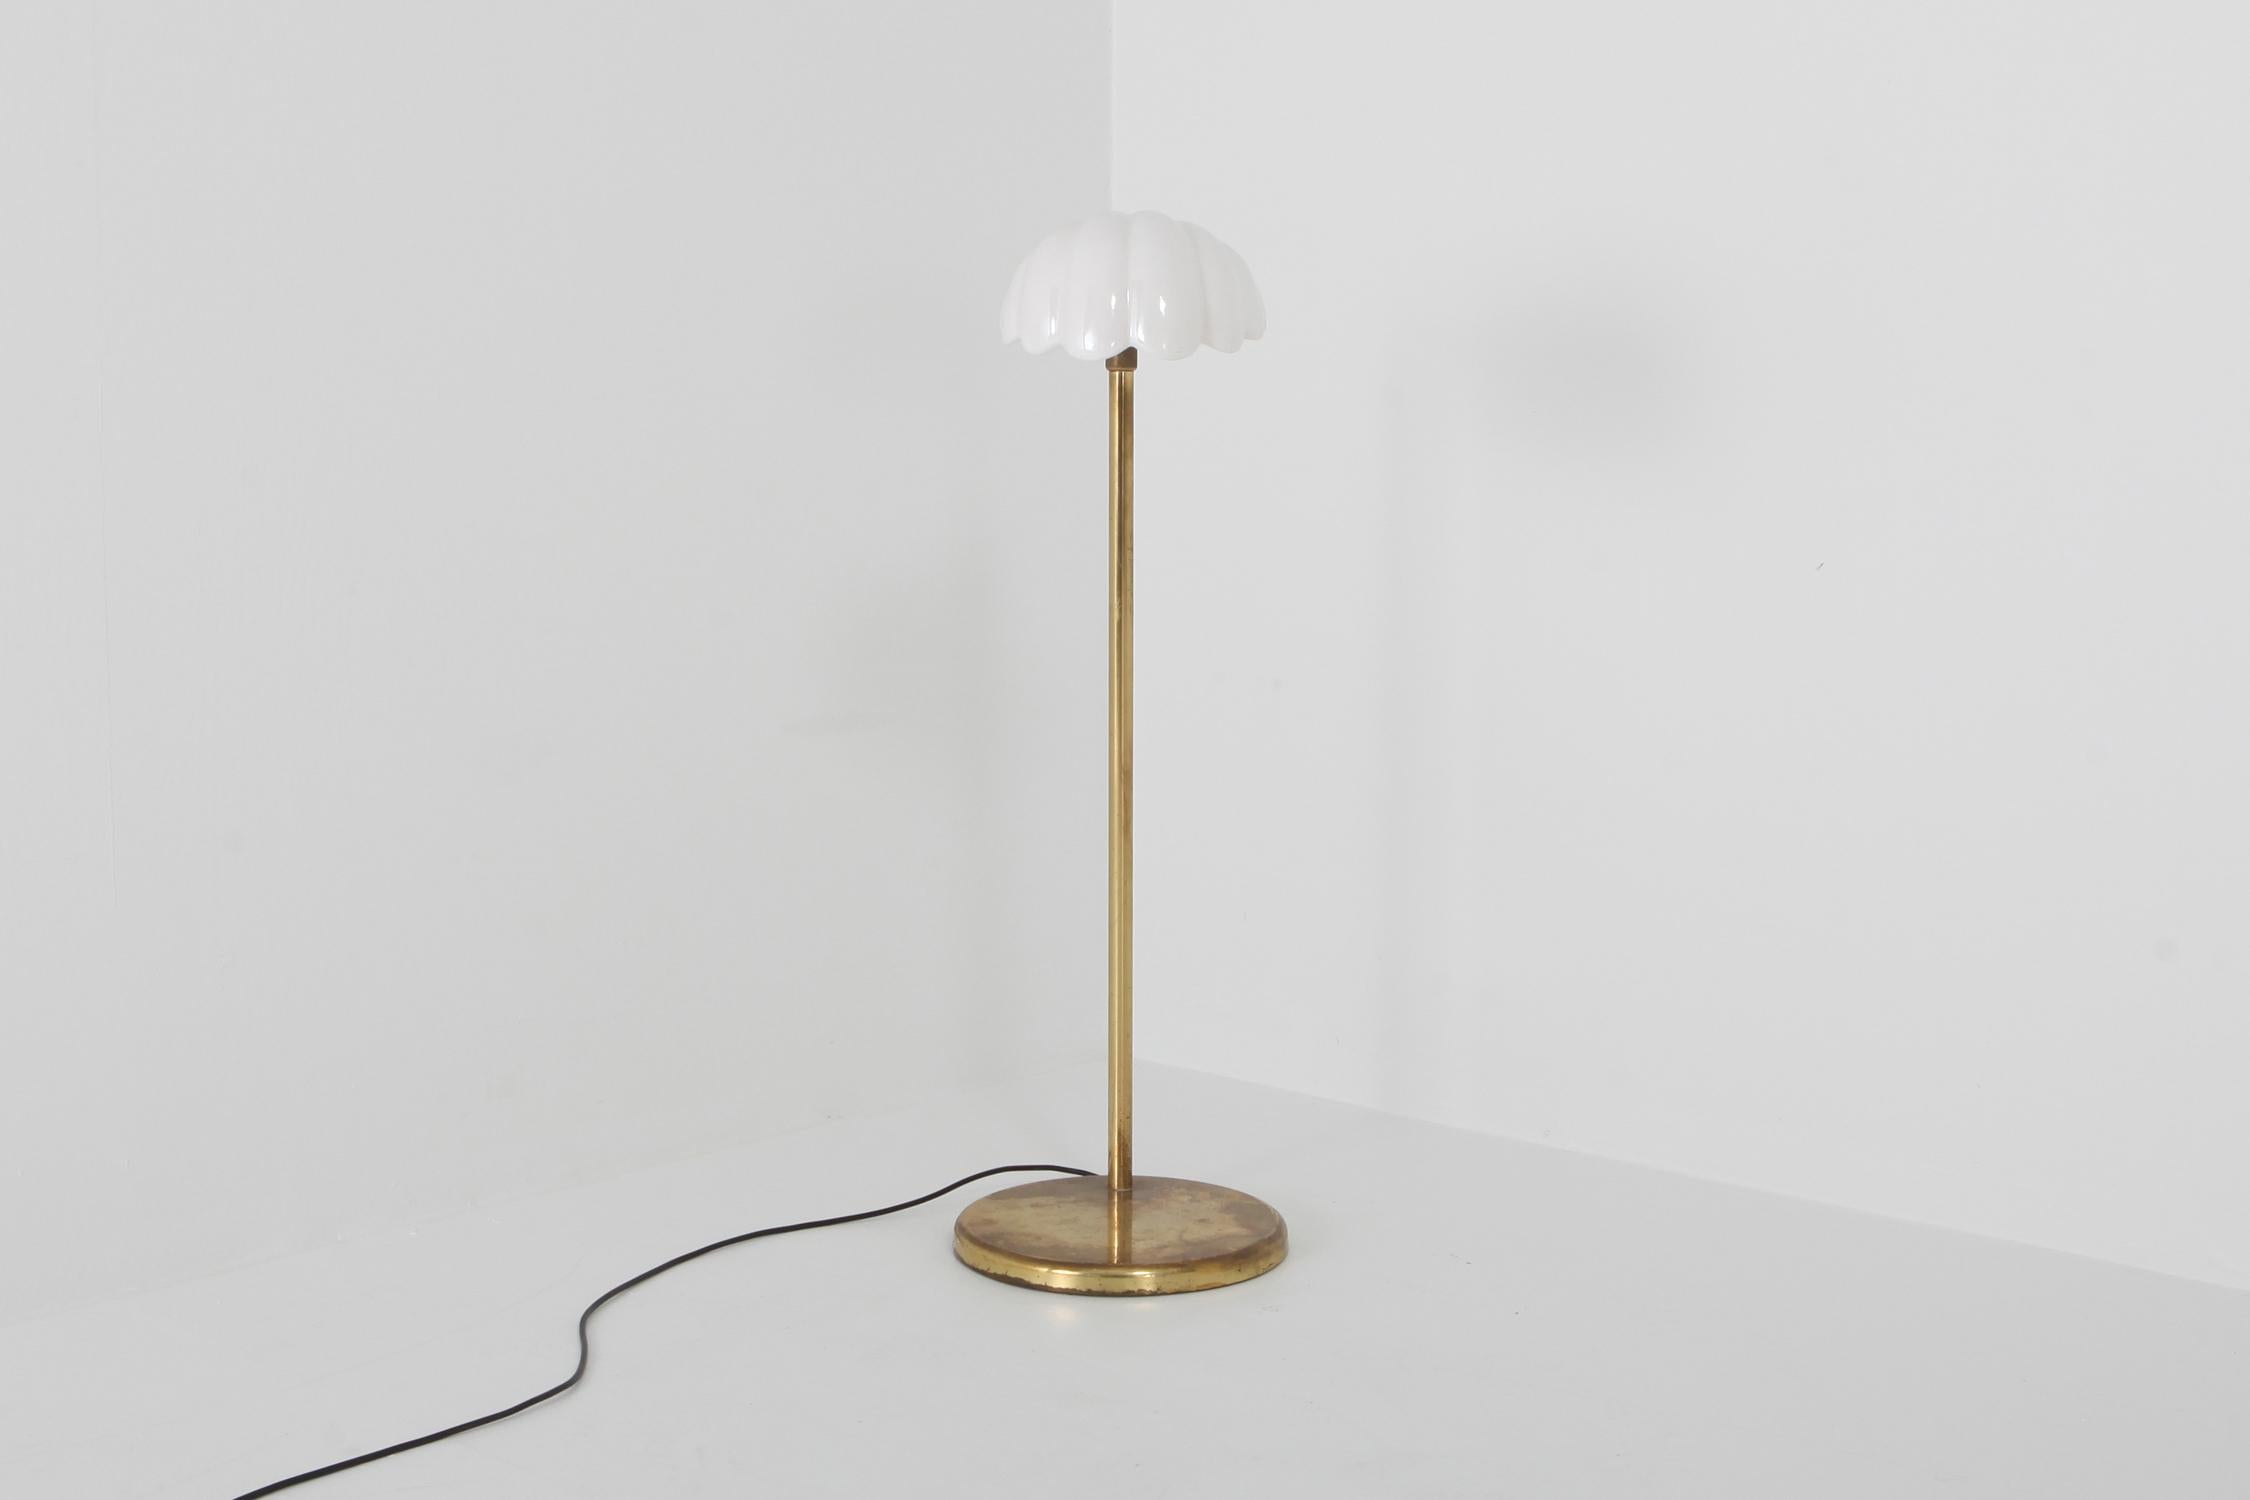 Brass floor lamp, porcelain shade, Angelo Brotto, Italy 1970s
The white porcelain shell shaped hood mounted on an adjustable brass base make this piece into a perfect reading lamp.

Fits well in an eclectic Hollywood Regency inspired by Gabriella